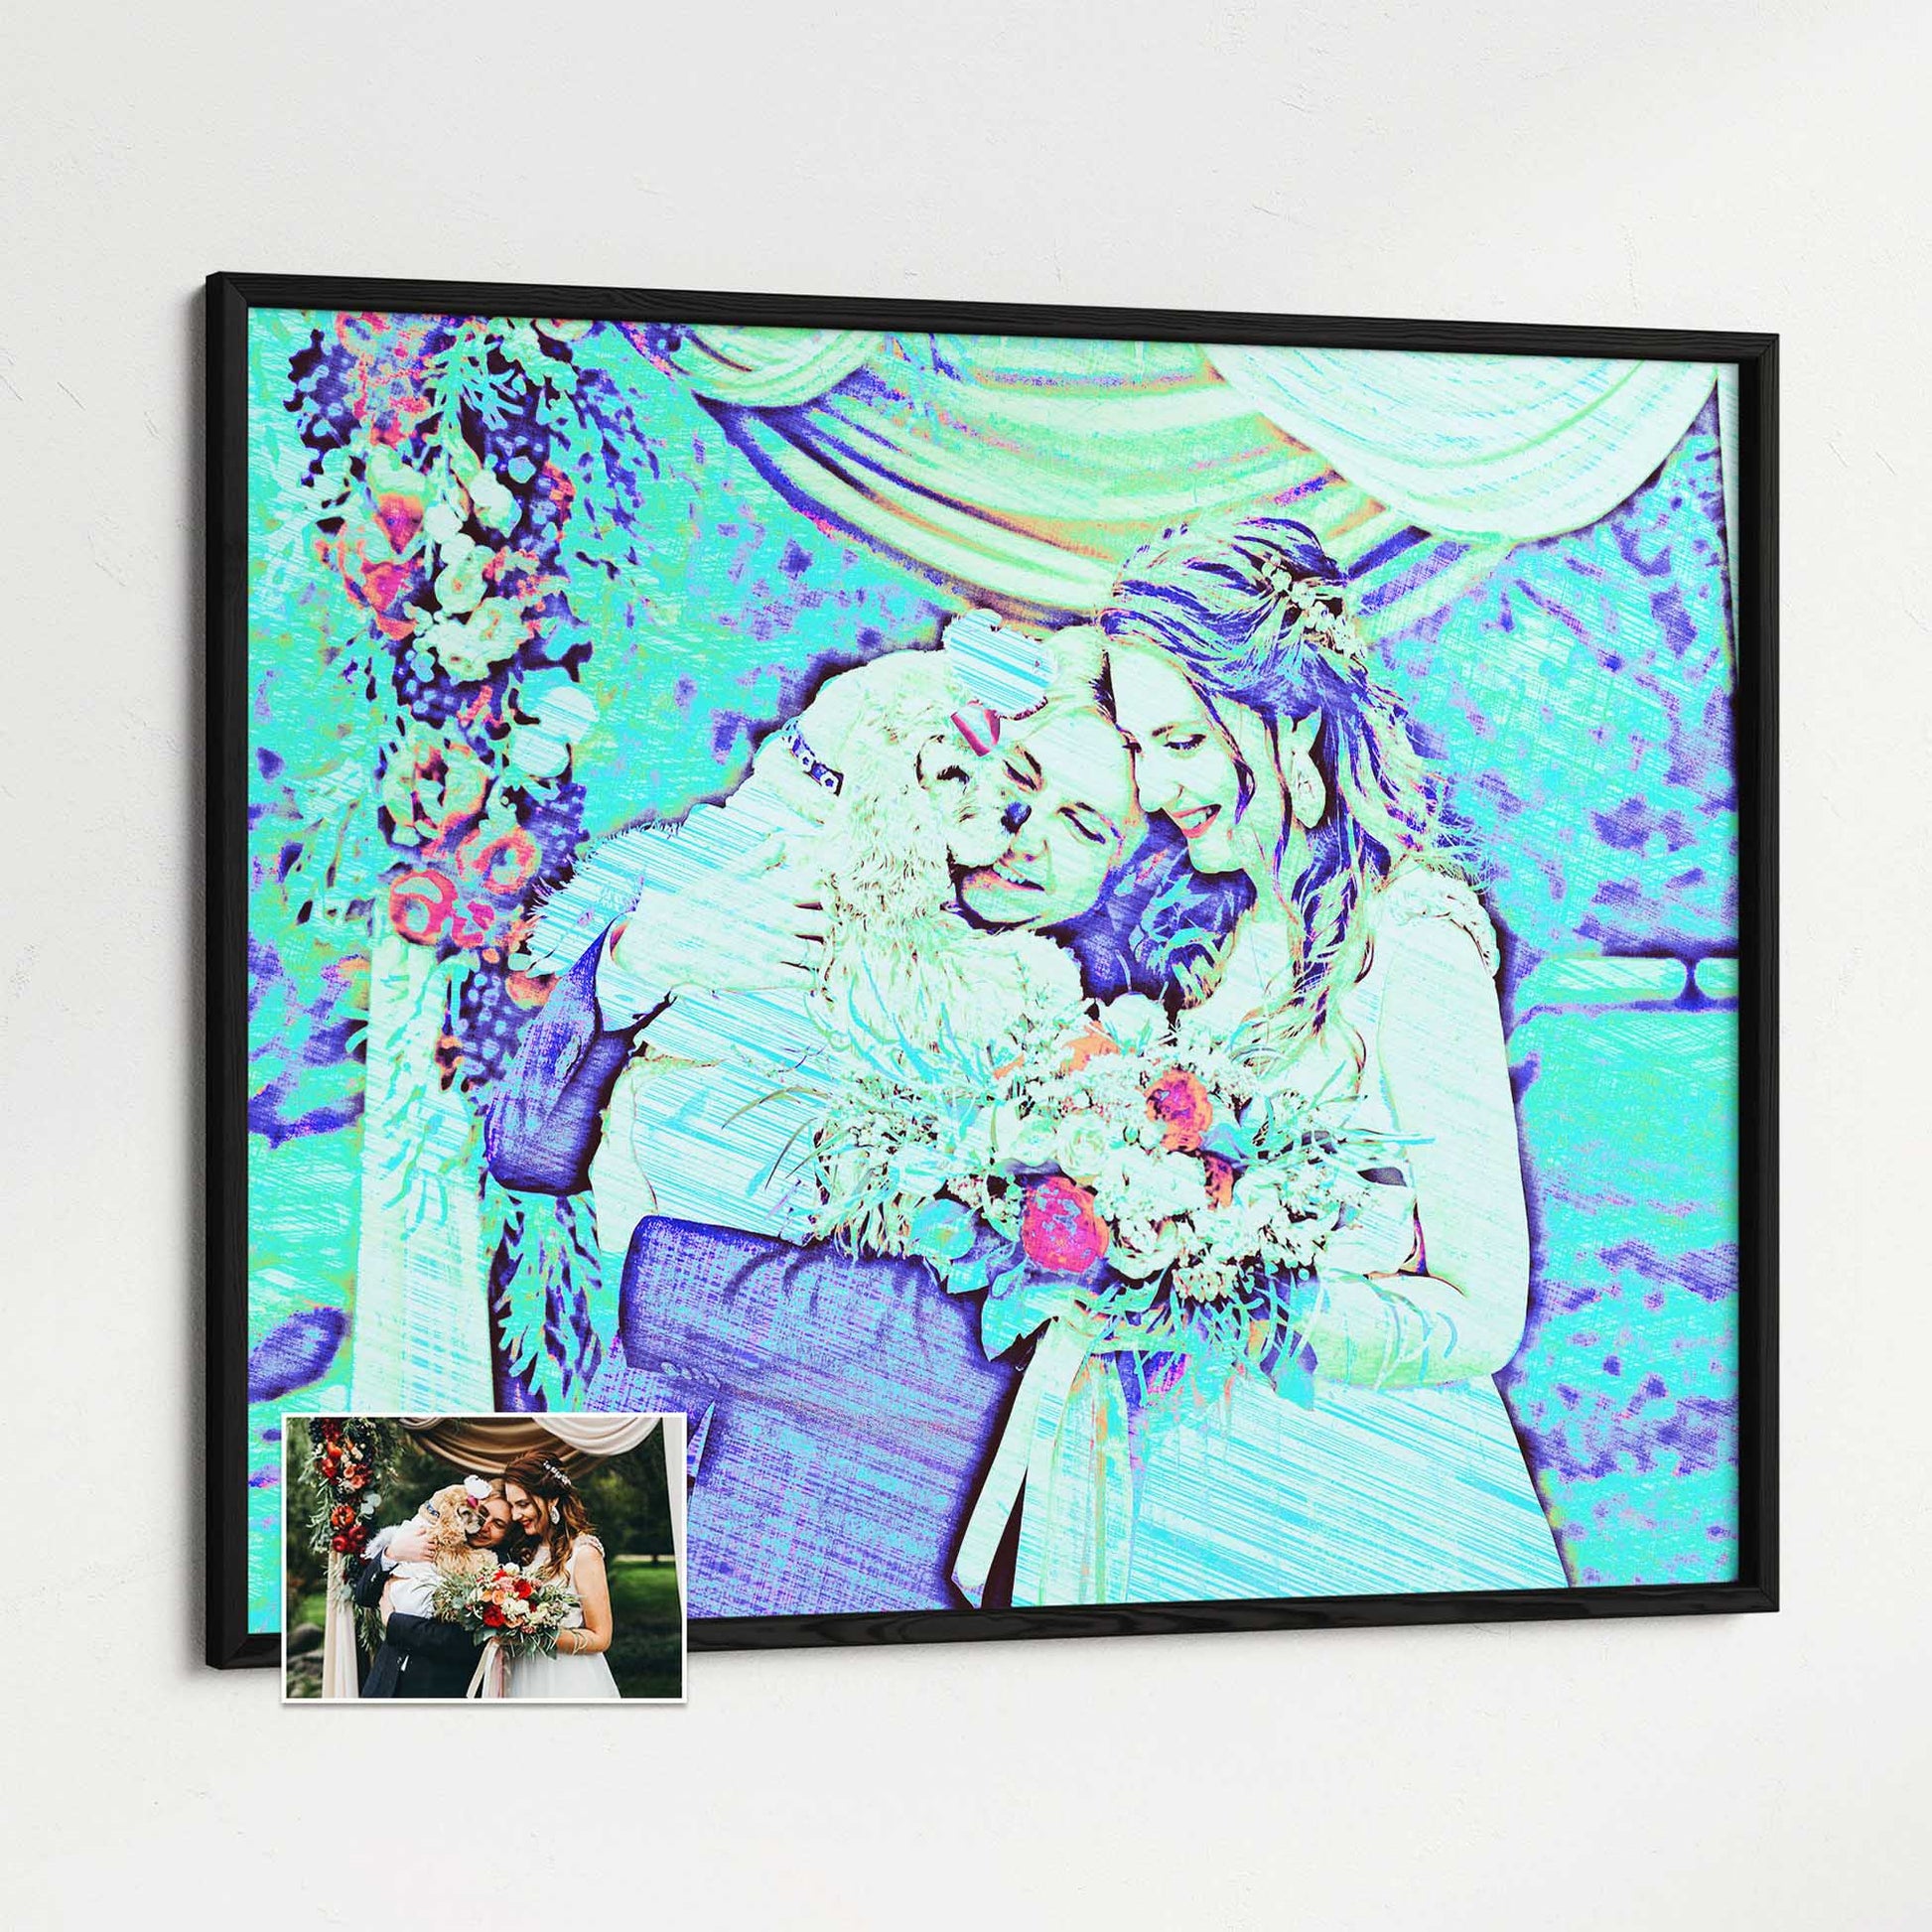 Transform your photo into a work of art with a Personalised Blue Drawing Framed Print. The pencil effect adds a cool and artistic touch, making it a unique and creative addition to your home or office decor, original and fresh art print